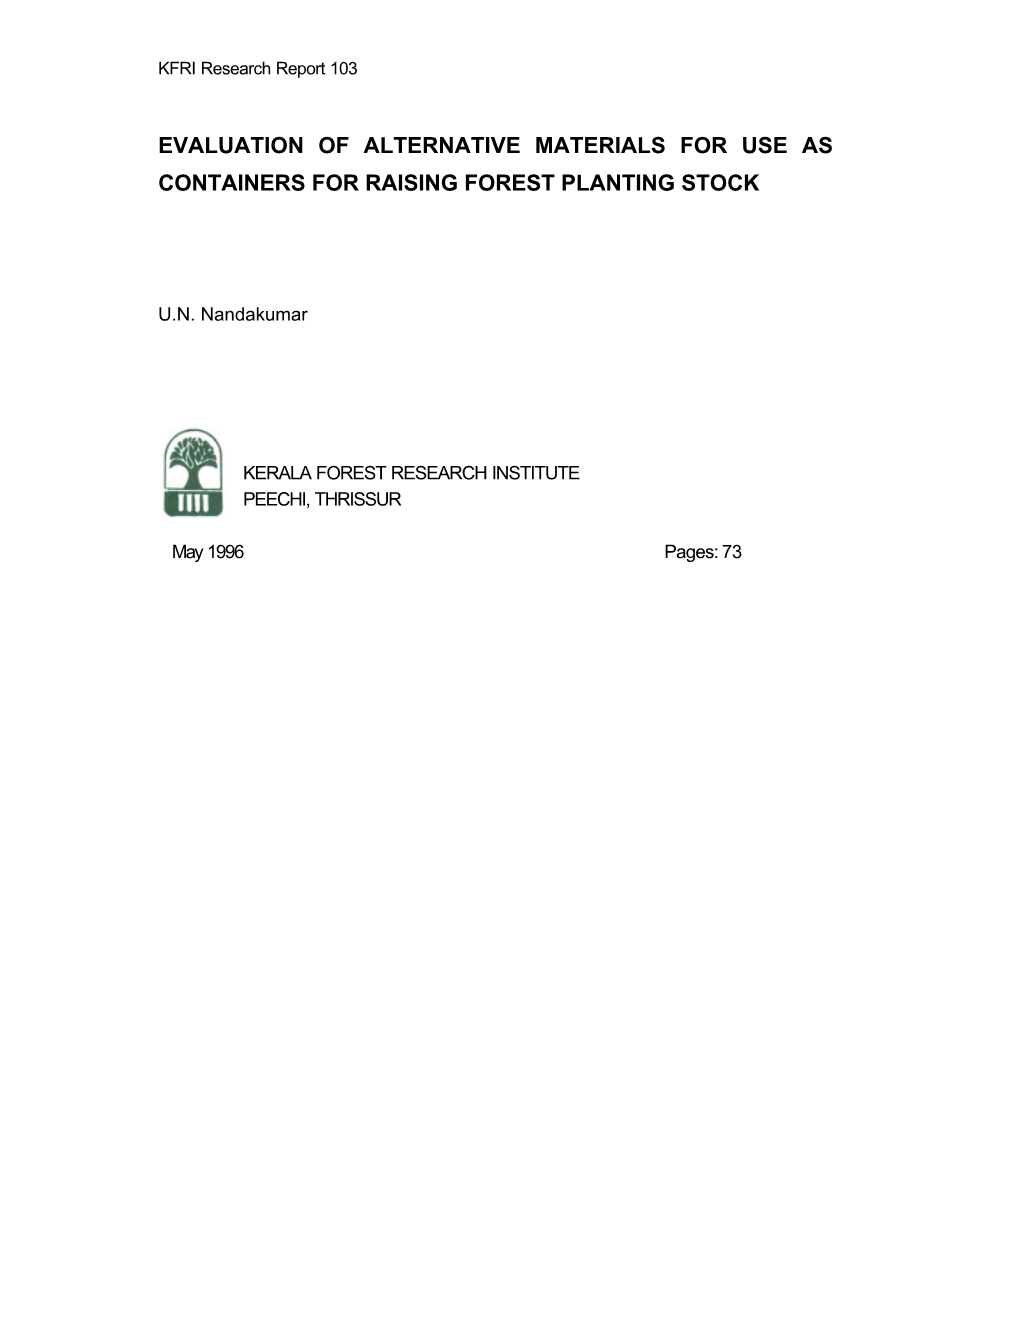 Evaluation of Alternative Materials for Use As Containers for Raising Forest Planting Stock